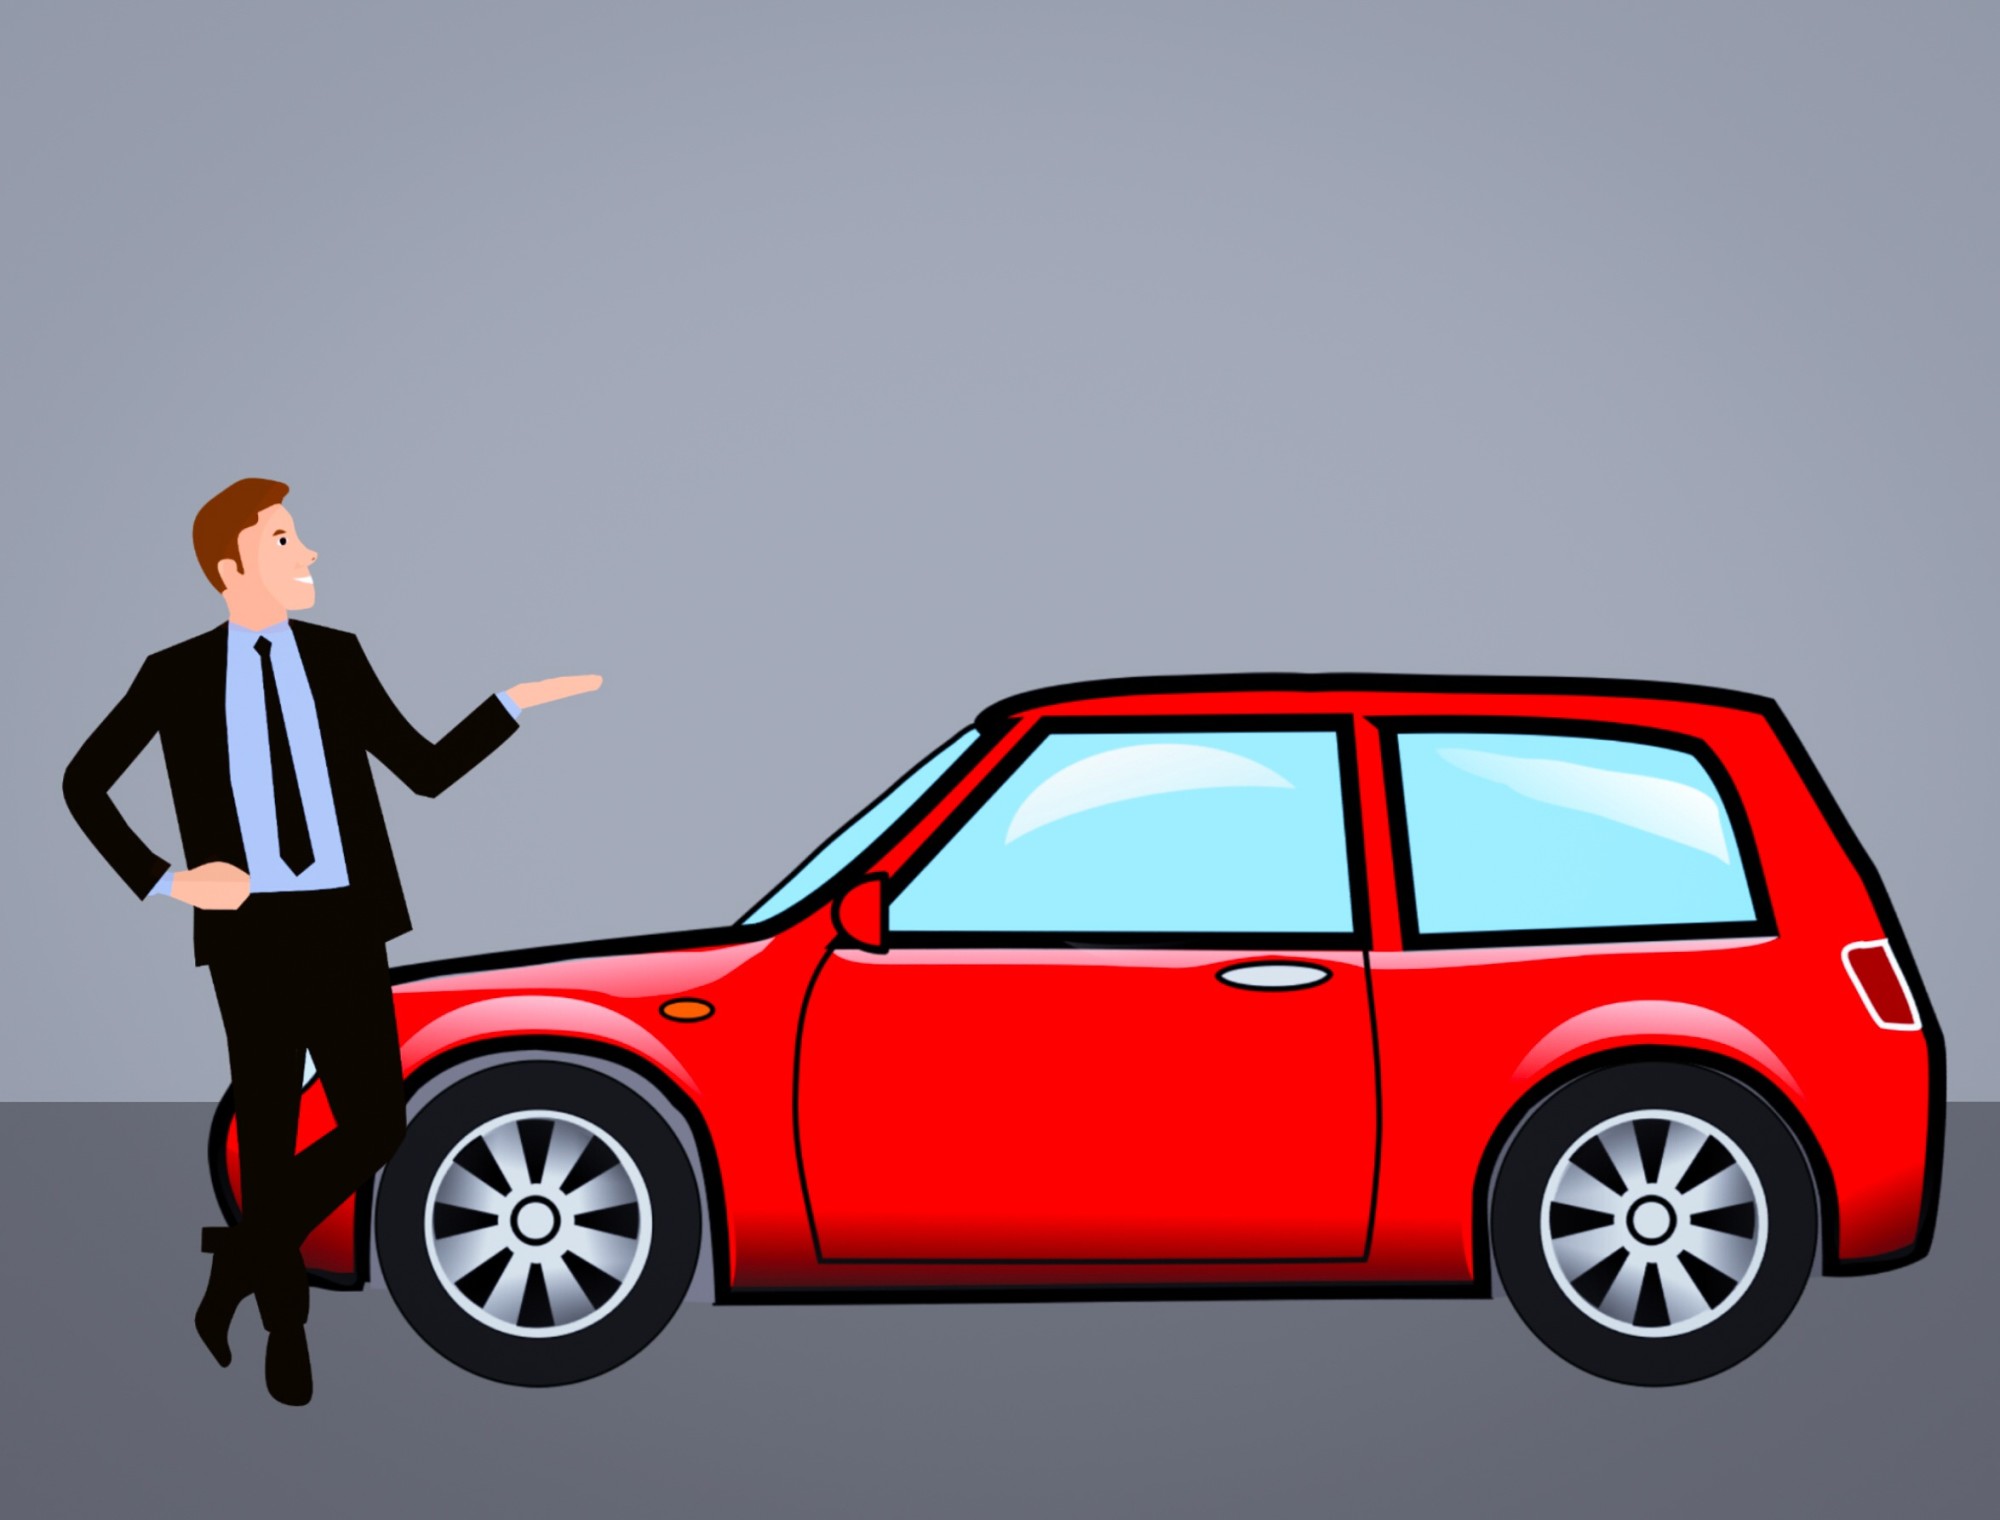 Buying a Car Illustrated